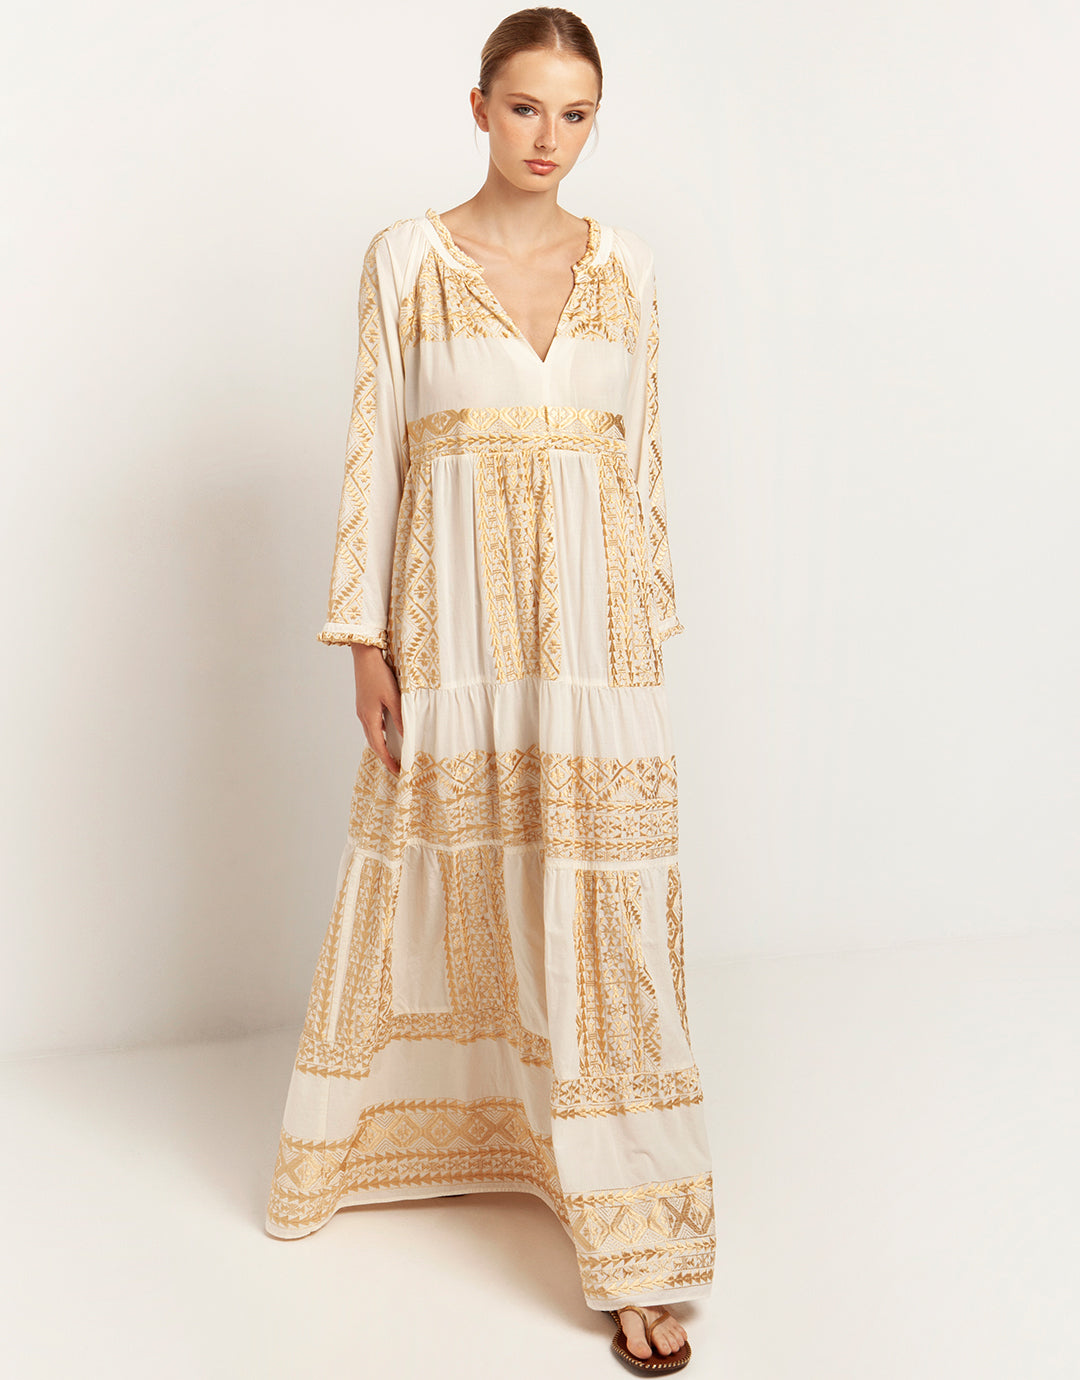 Classic Triangle Maxi Dress - Natural and Gold - Simply Beach UK